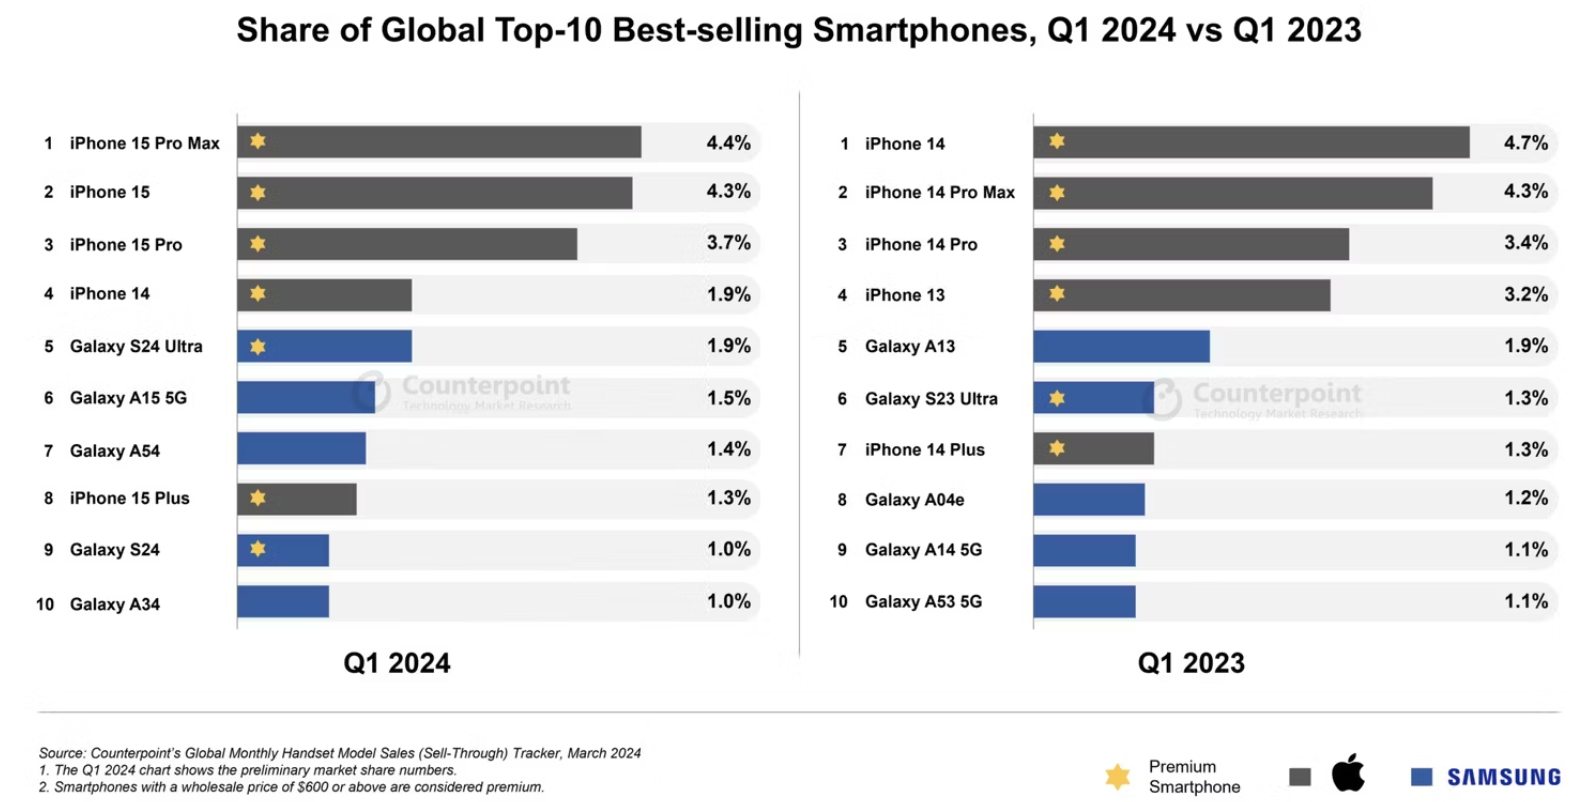 Samsung Galaxy S24 Ultra Achieves Top Sales as Best-Selling Android Device in Q1 2024